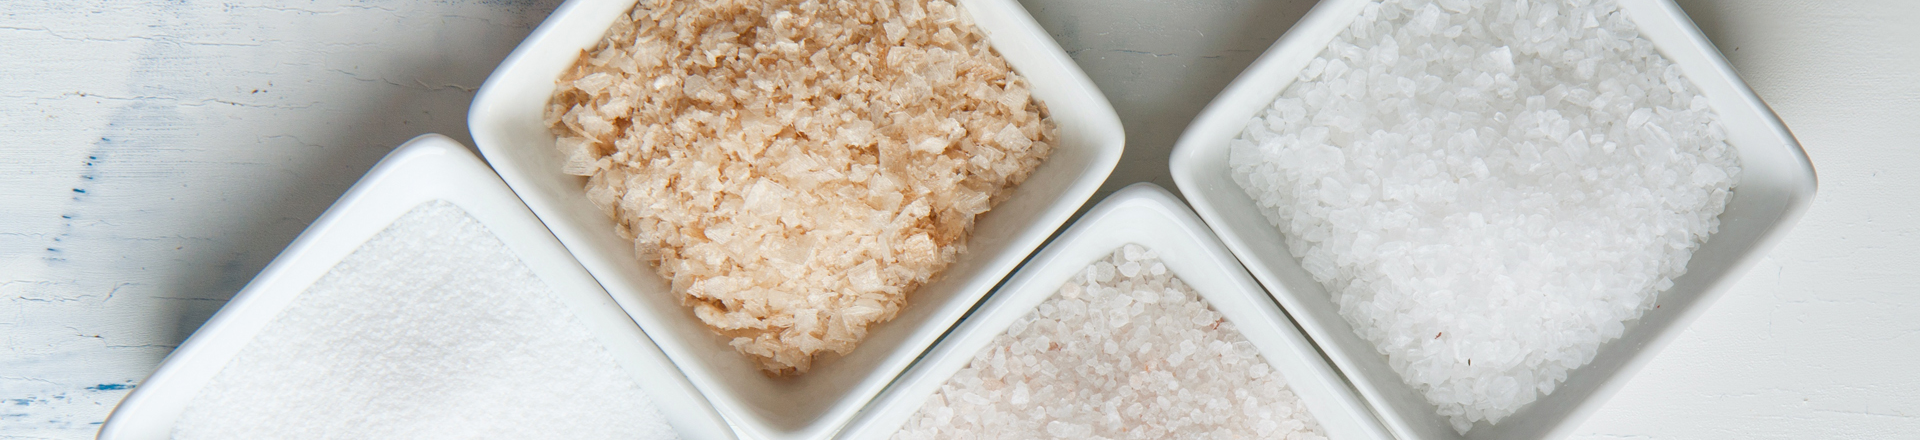 how much sodium is too much? hyperbolic bowls of salt crystals